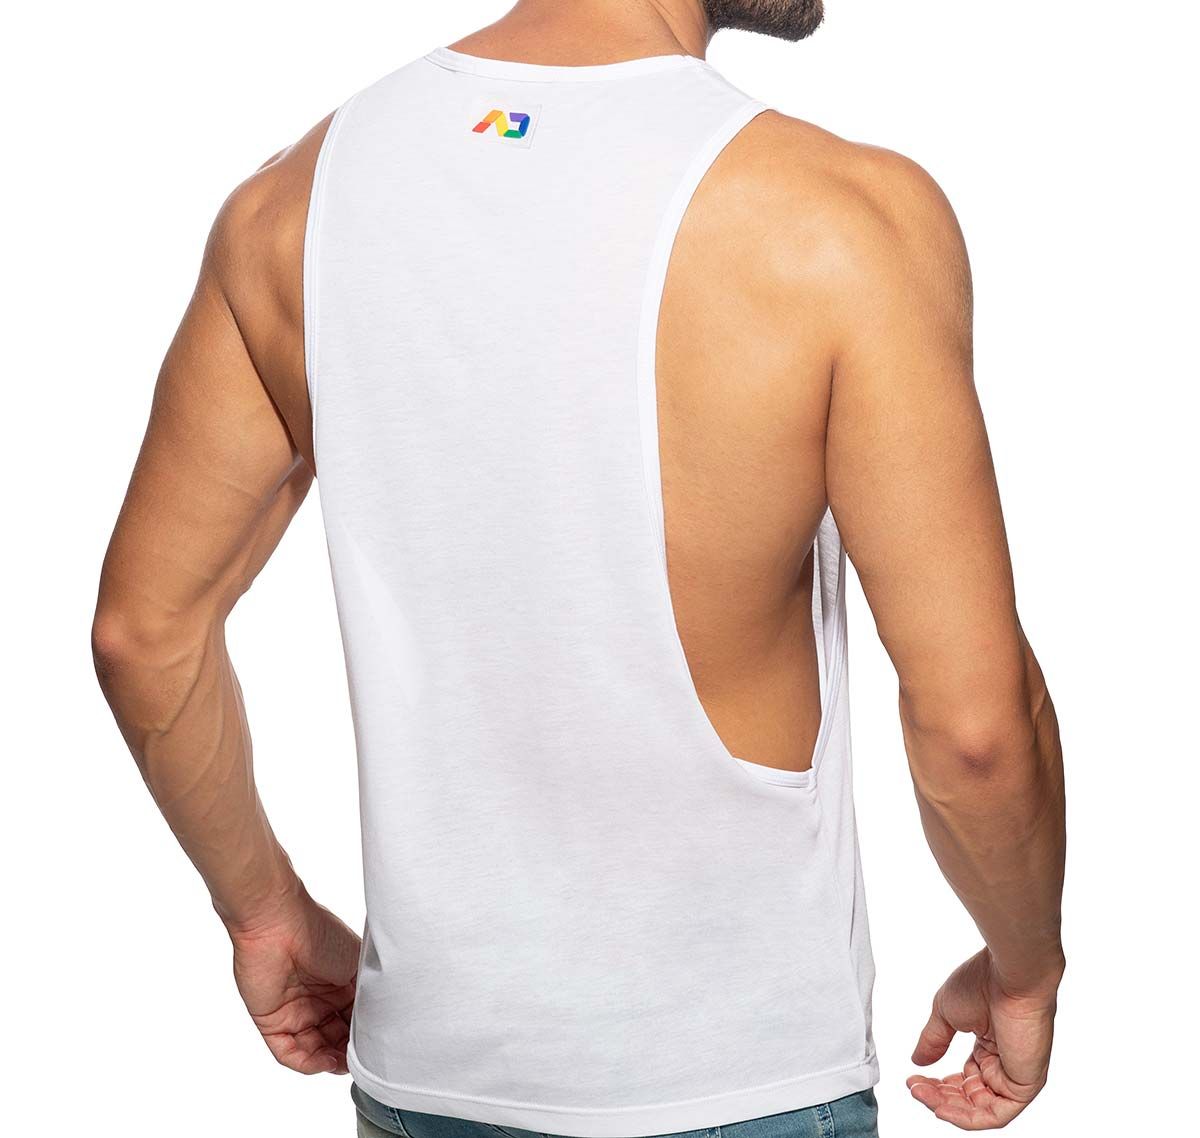 Addicted Tank Top MAD PRIDE LOW RIDER PU454, white